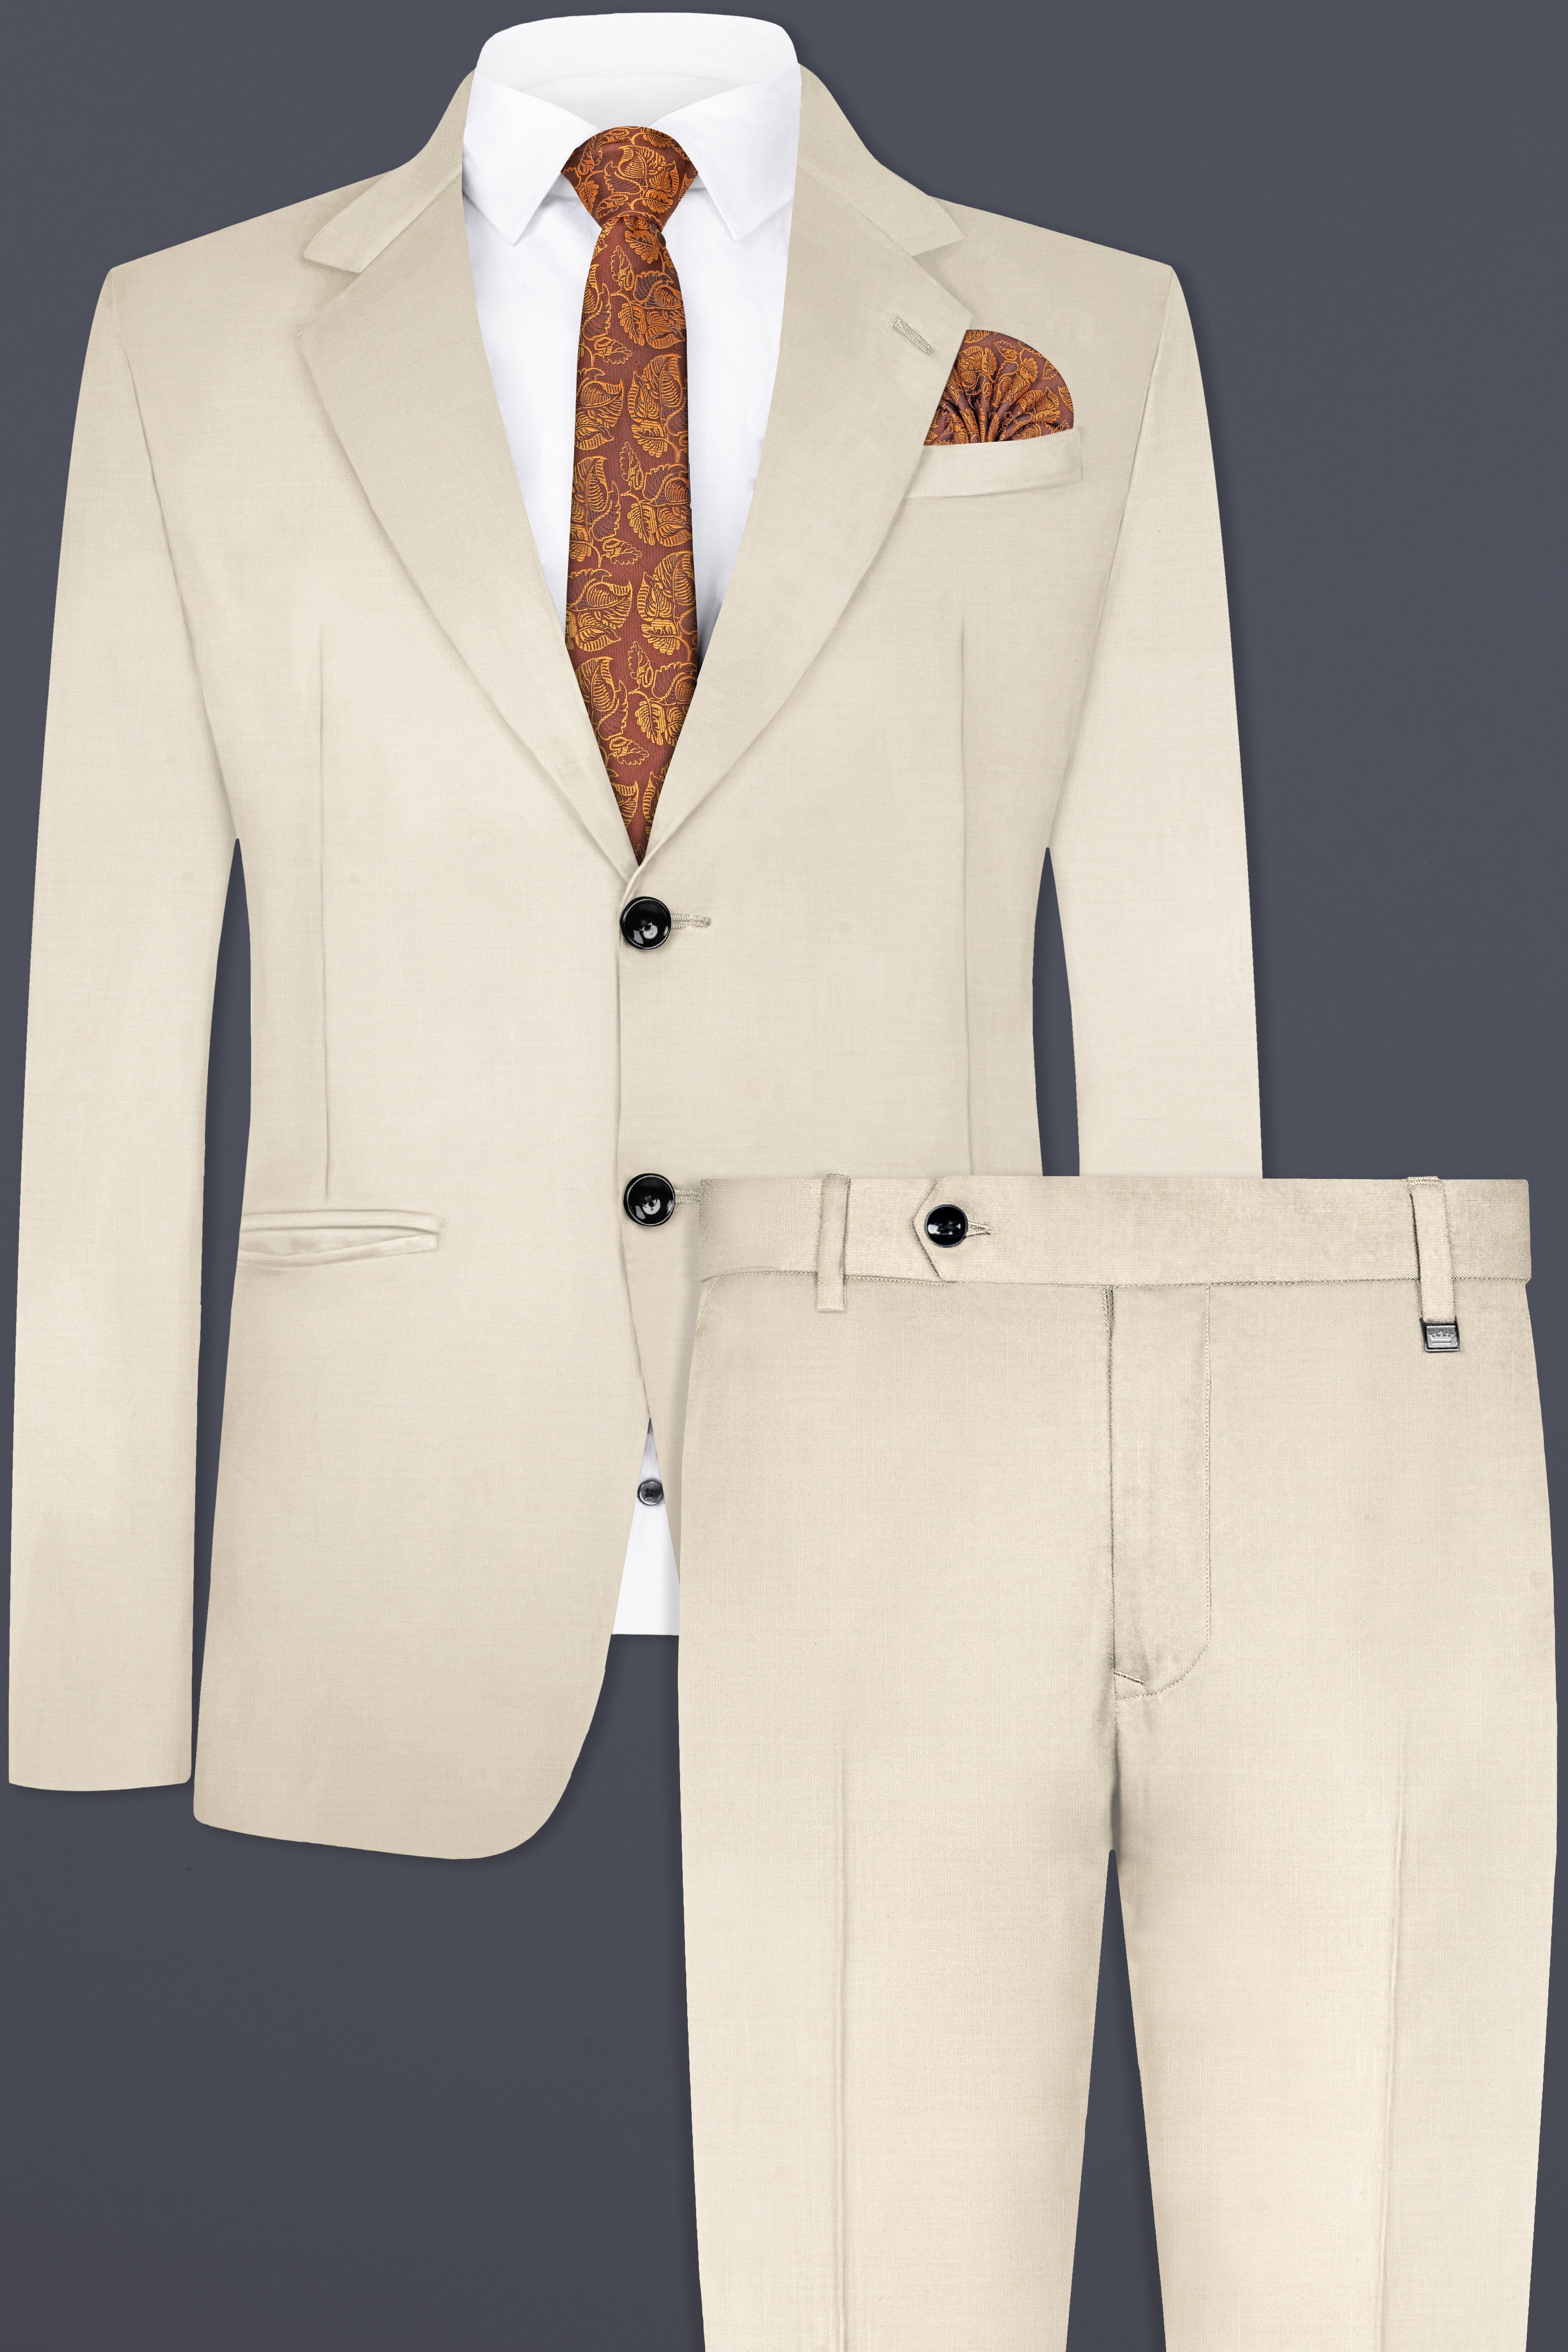 Moon Mist Cream Solid Wool Blend Single Breasted Suit